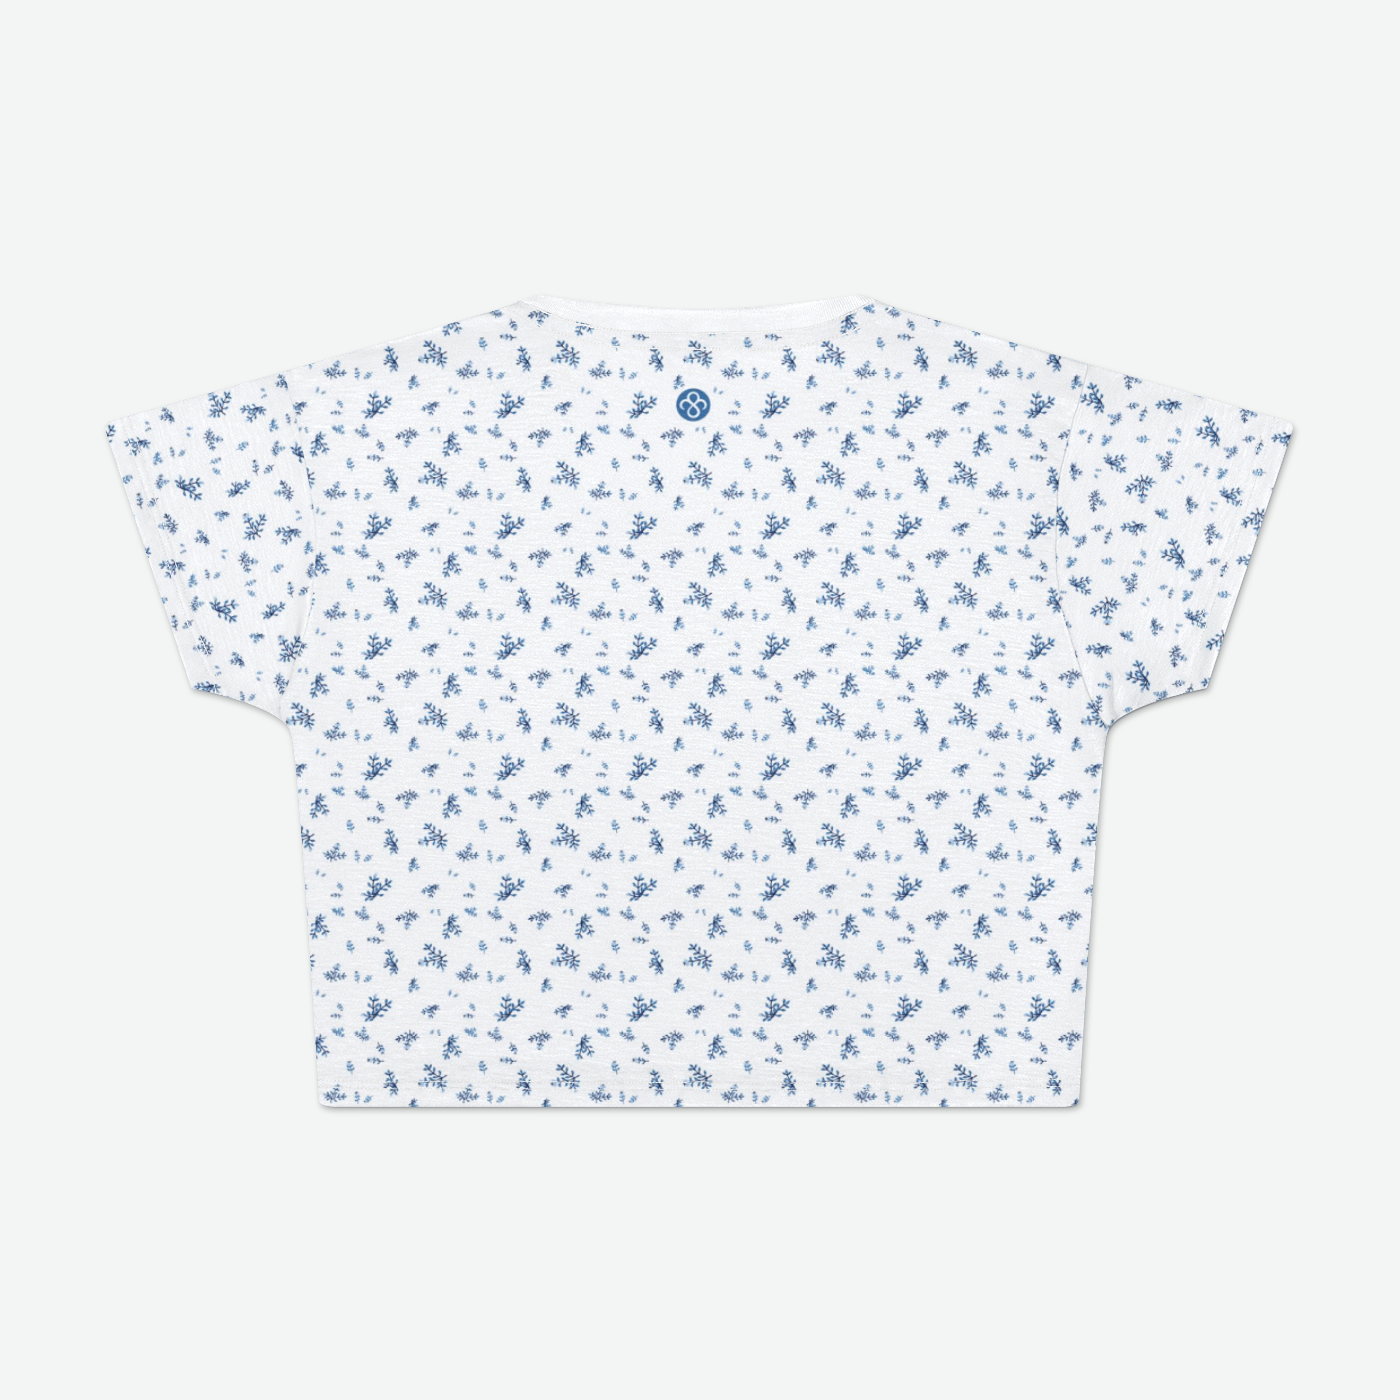 Frosty Blossoms Crop Top